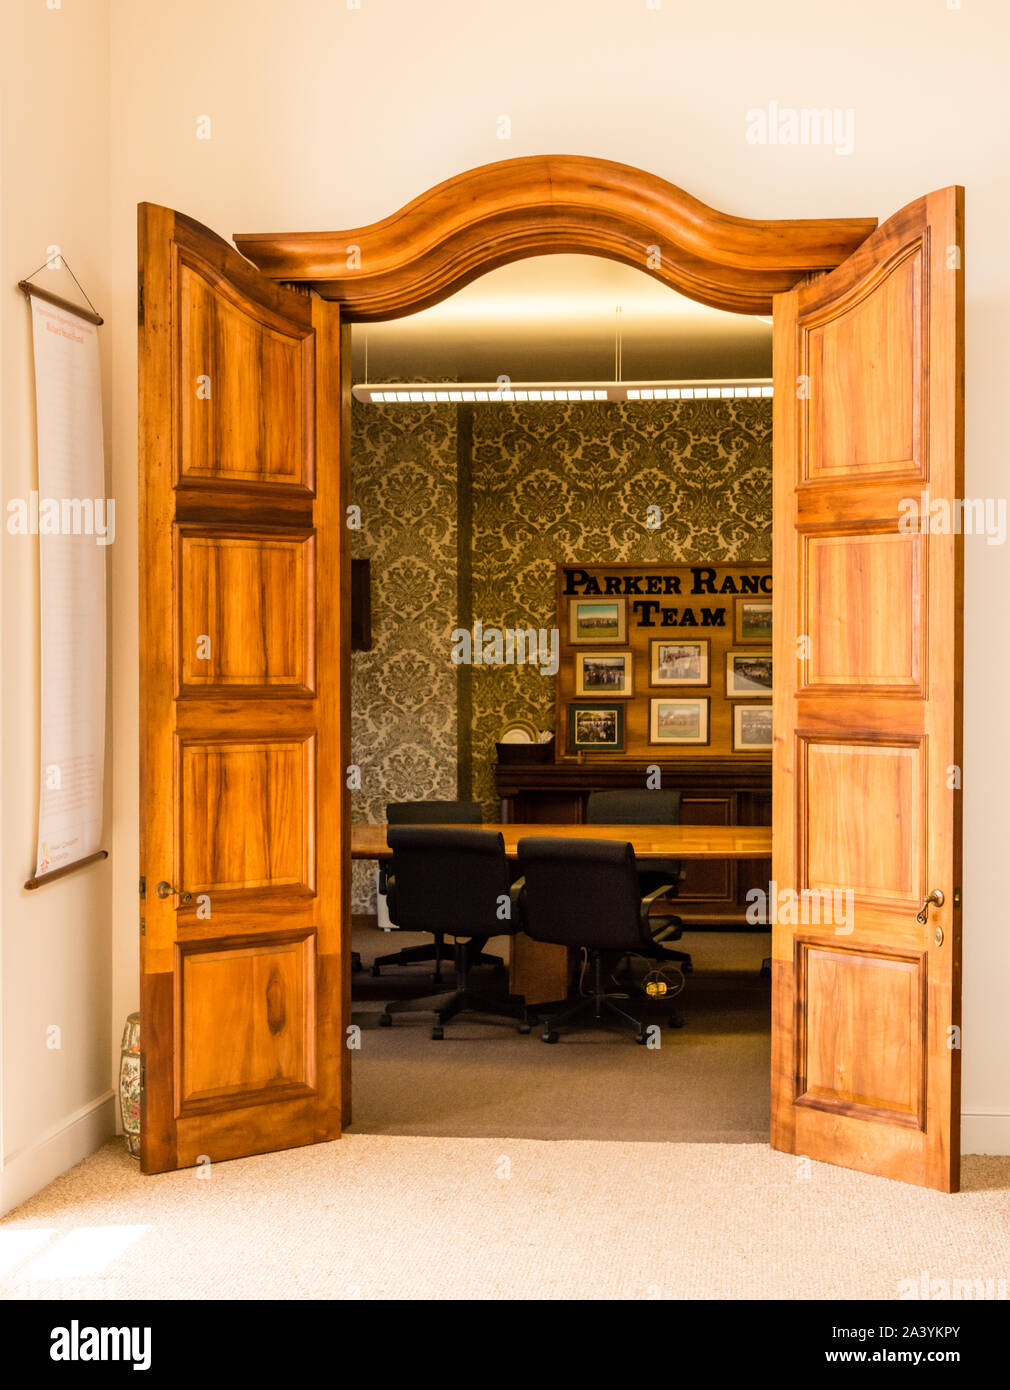 Hawai‘i, the Big Island, Kamuela, Parker Ranch, Puuopelu Conference Room Stock Photo